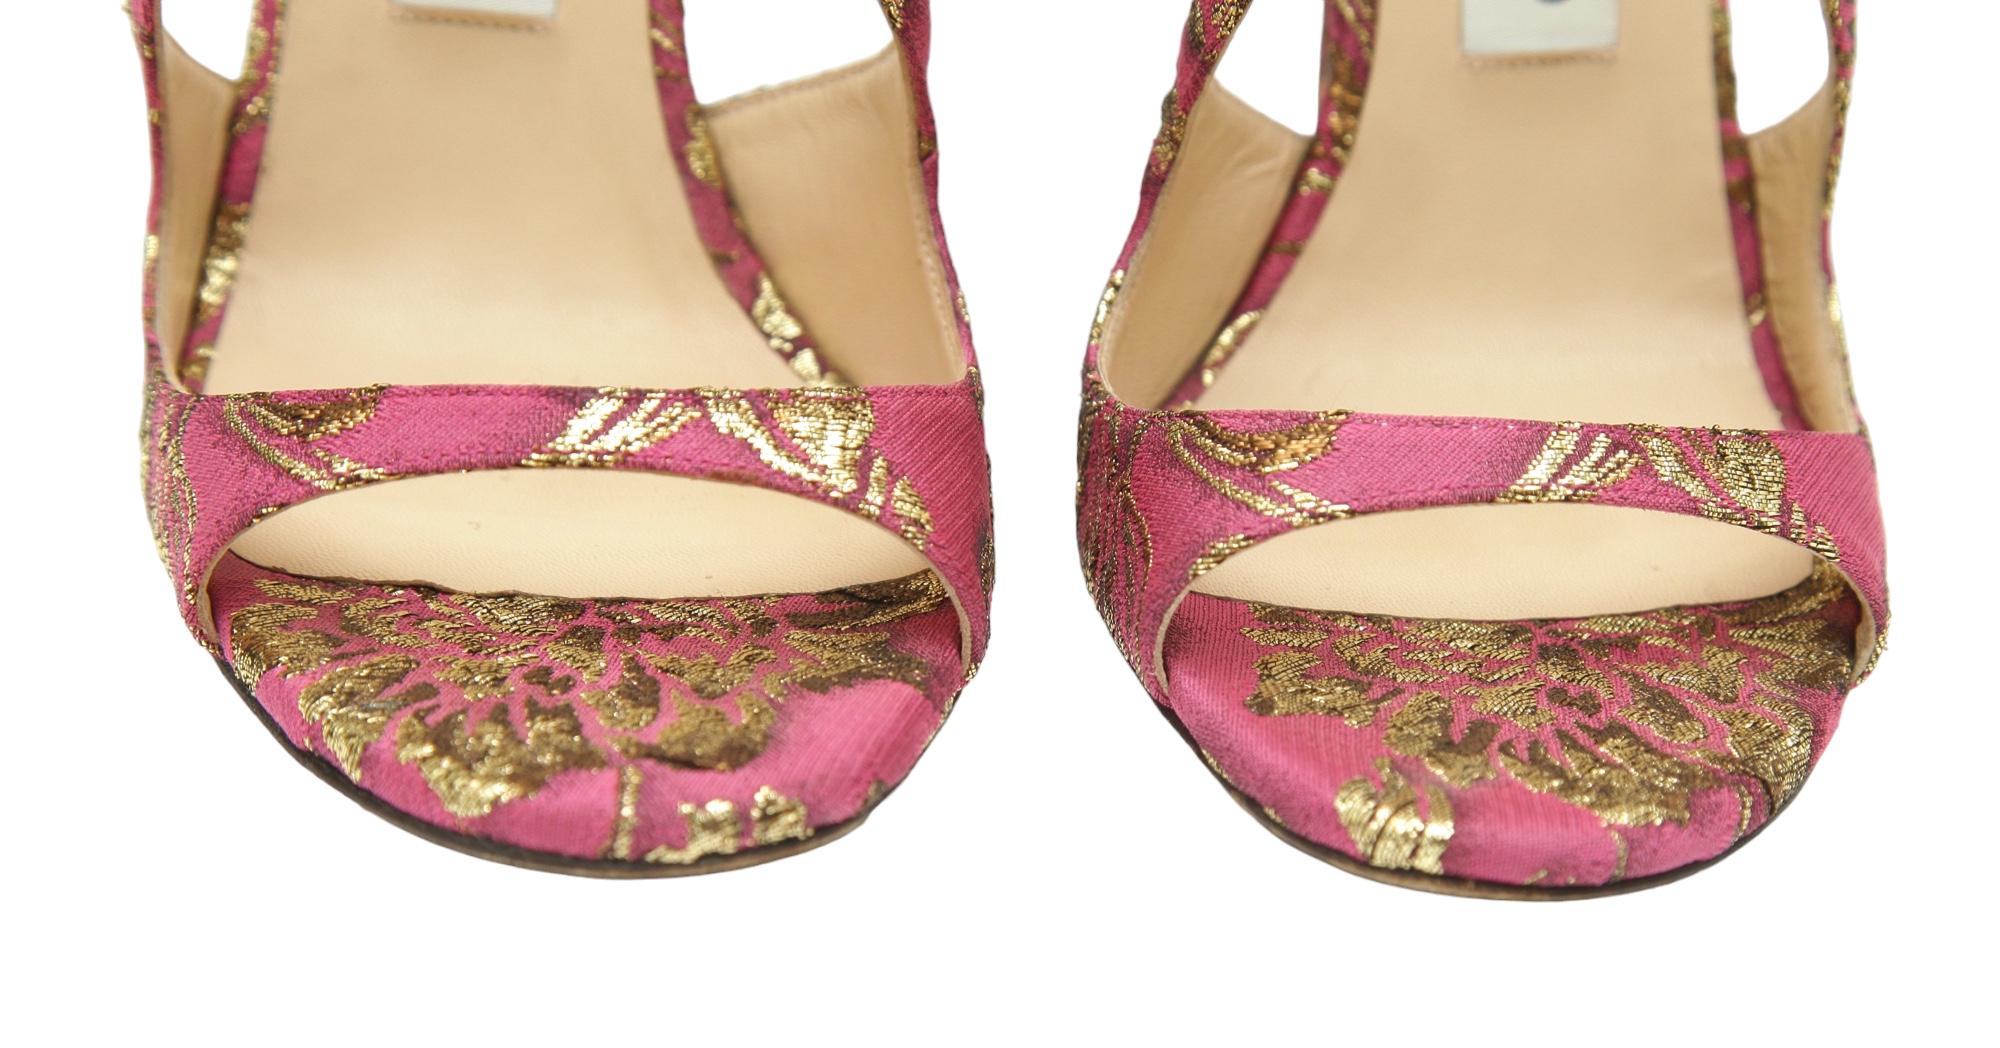 JIMMY CHOO Sandals Brocade Pink Gold Metallic LANCER Heels Leather Strappy 38 For Sale 8